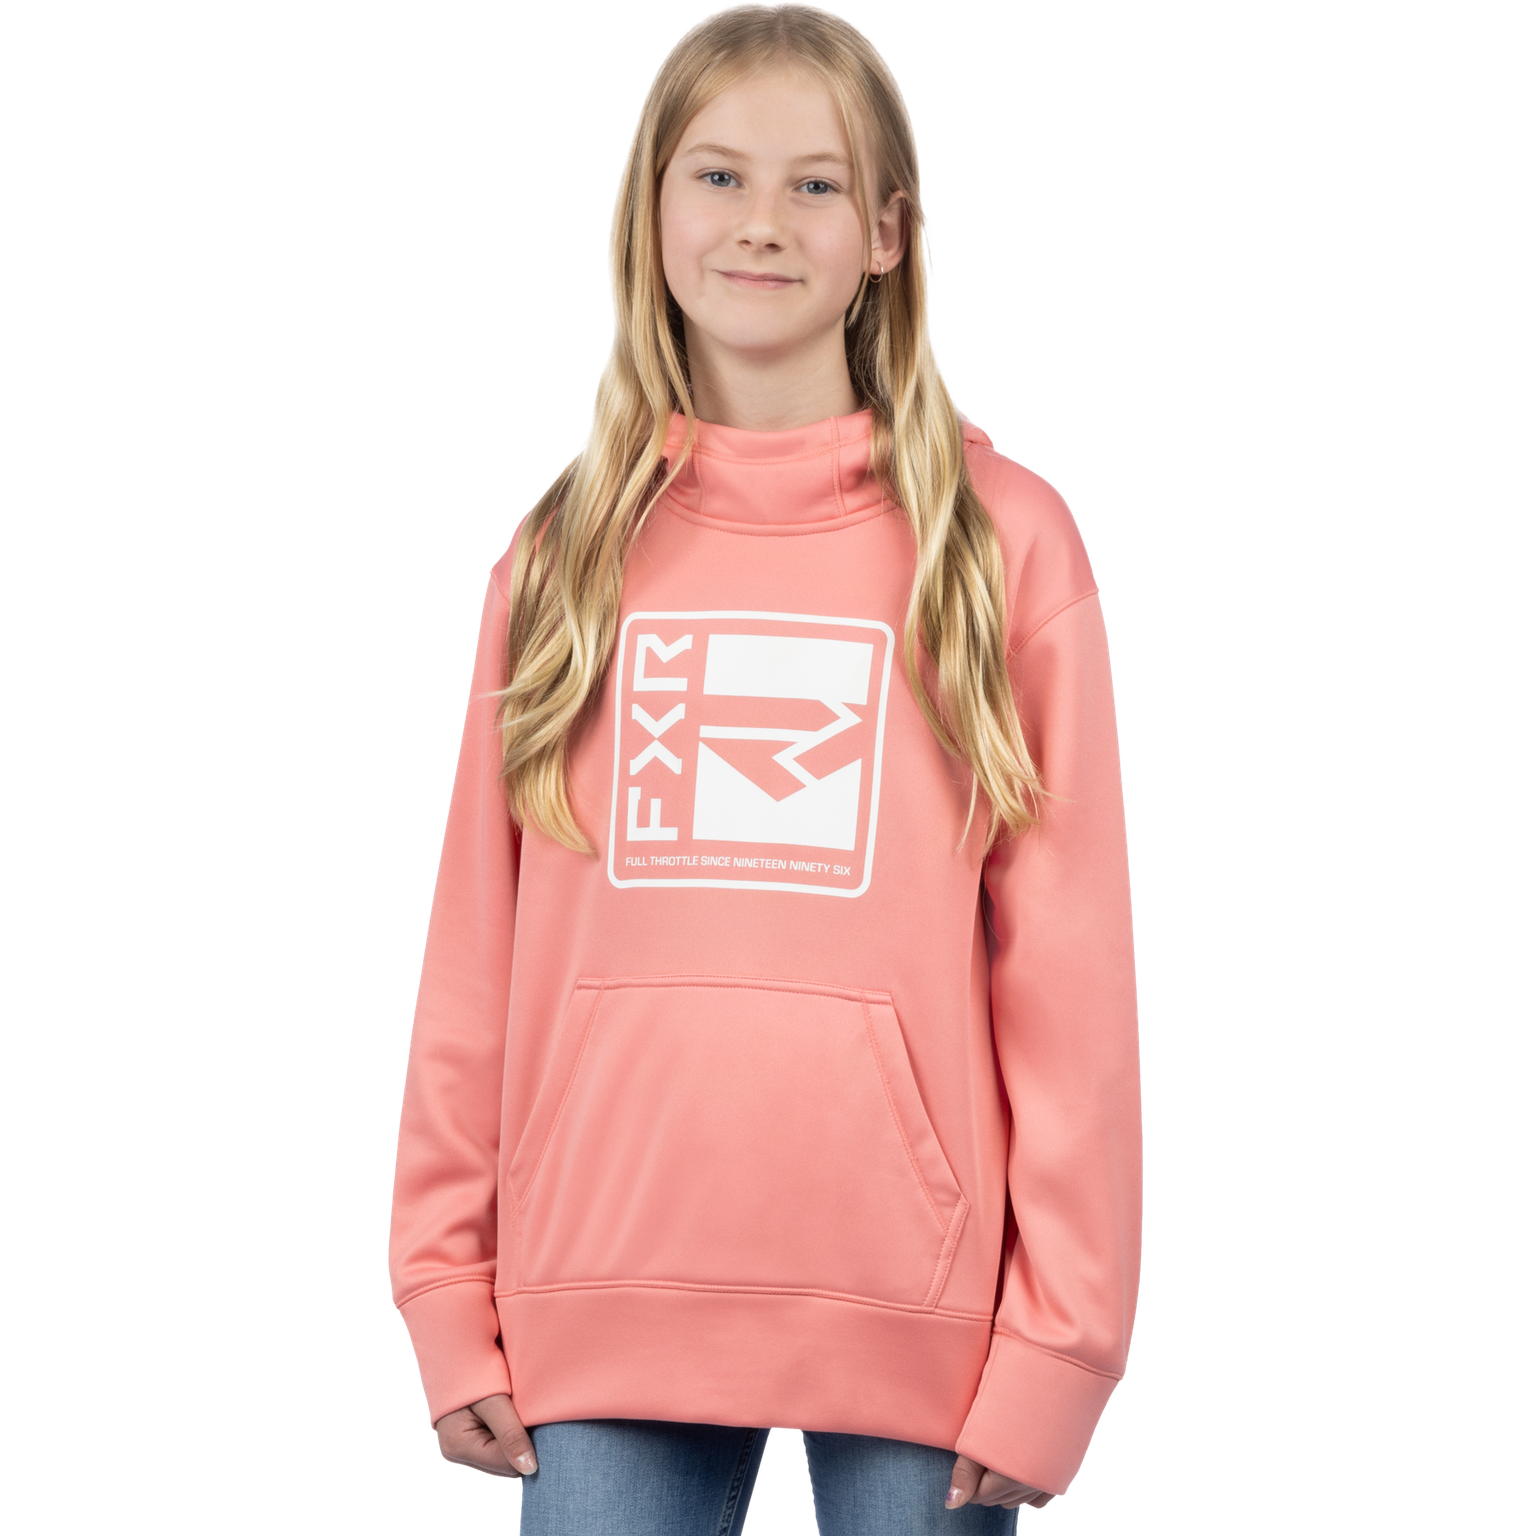 fxr racing hoodies kids for broadcast tech pullover